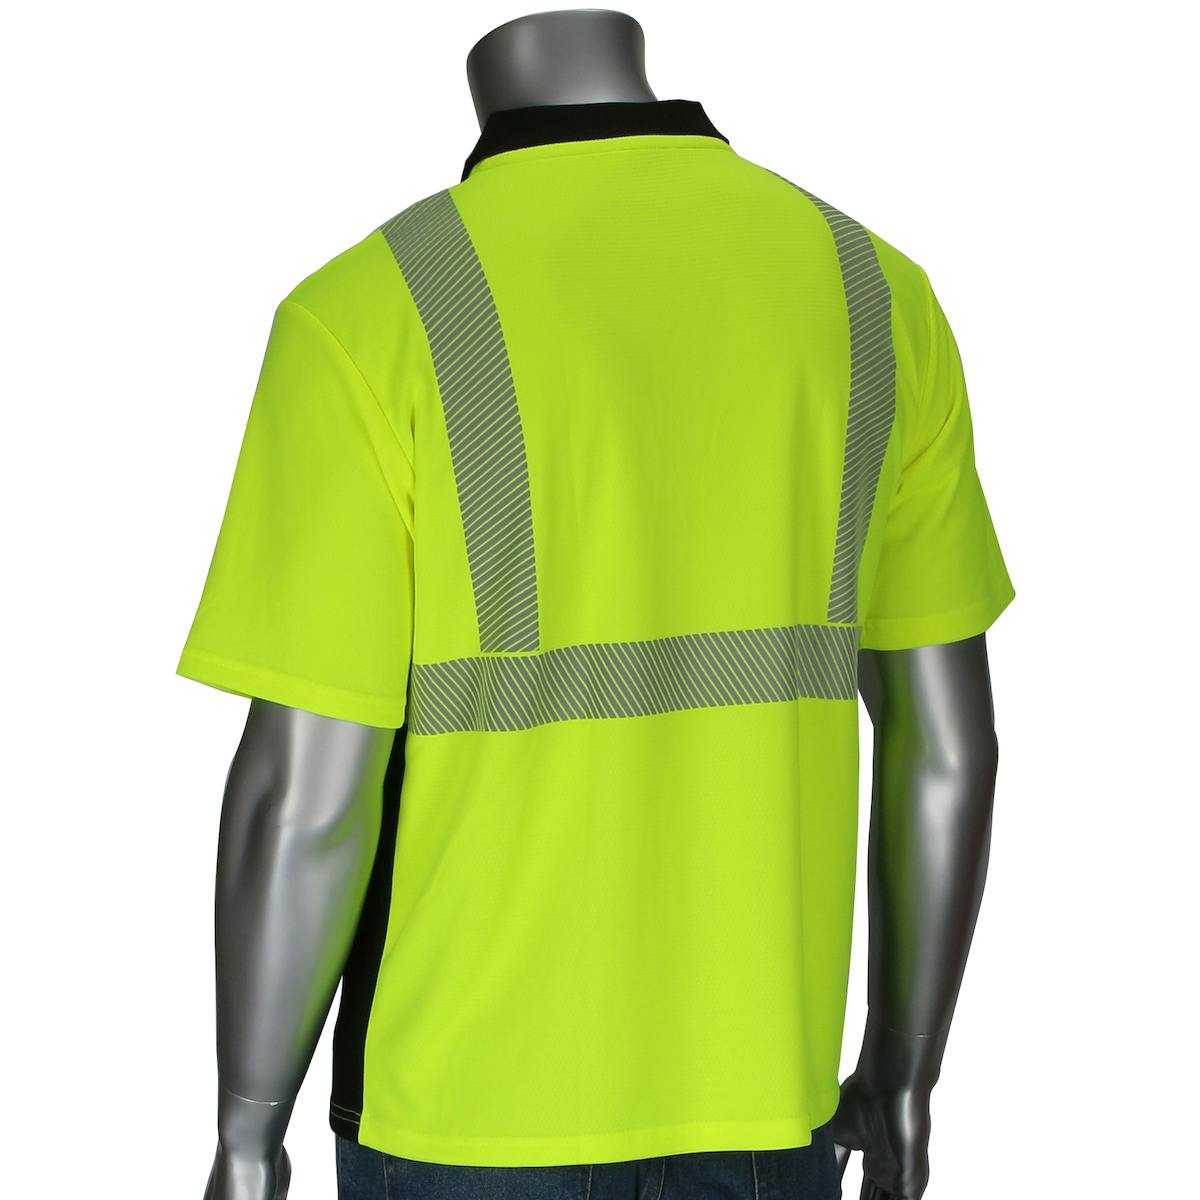 ANSI Type R Class 2 Polo Shirt with Performance Moisture Control Fabric and Black Bottom Front, Hi-Vis Yellow (312-1610B)